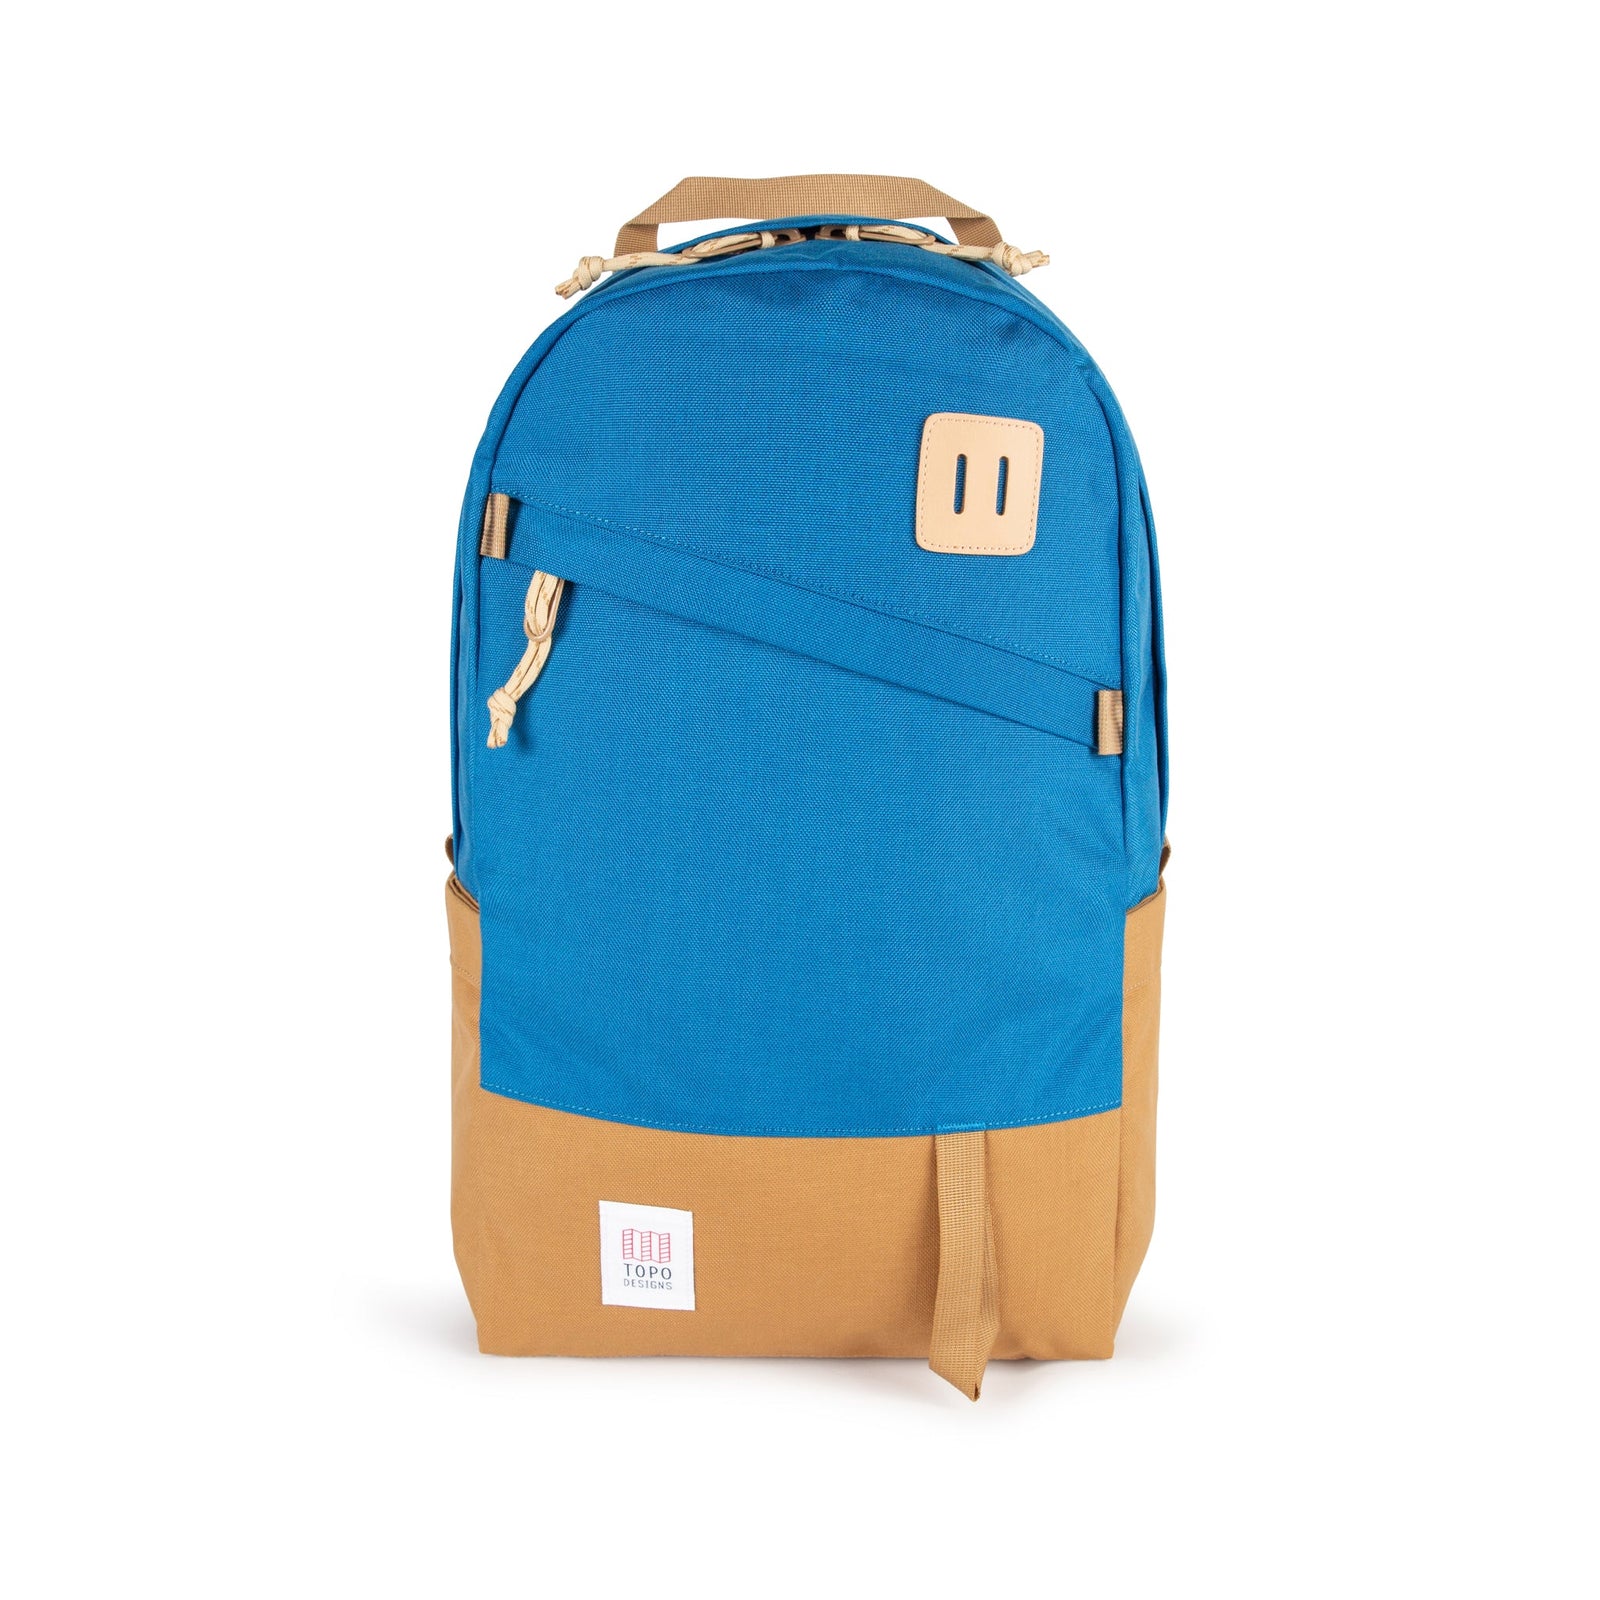 Topo Designs Daypack Classic 100% recycled nylon laptop backpack for work or school in "Blue / Khaki" brown.